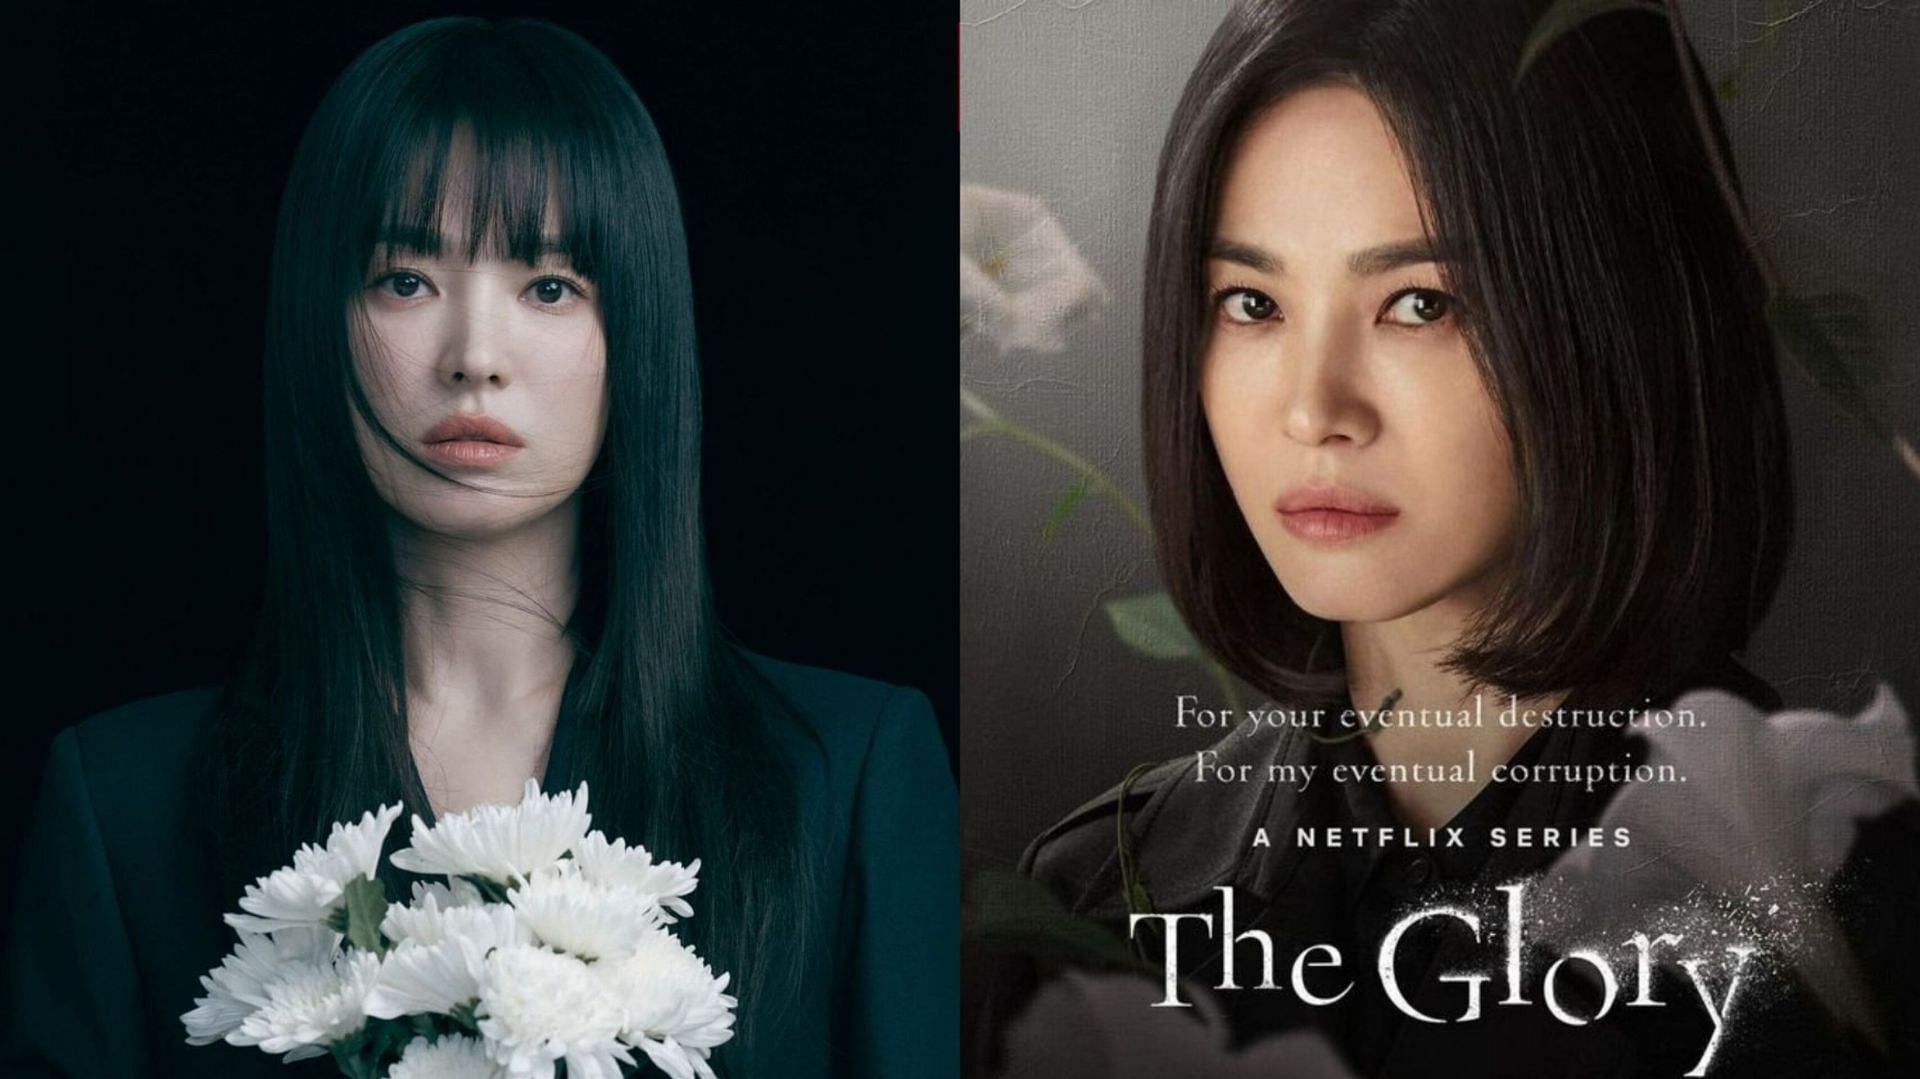 Featuring Song Hye-kyo (Image via Netflix)